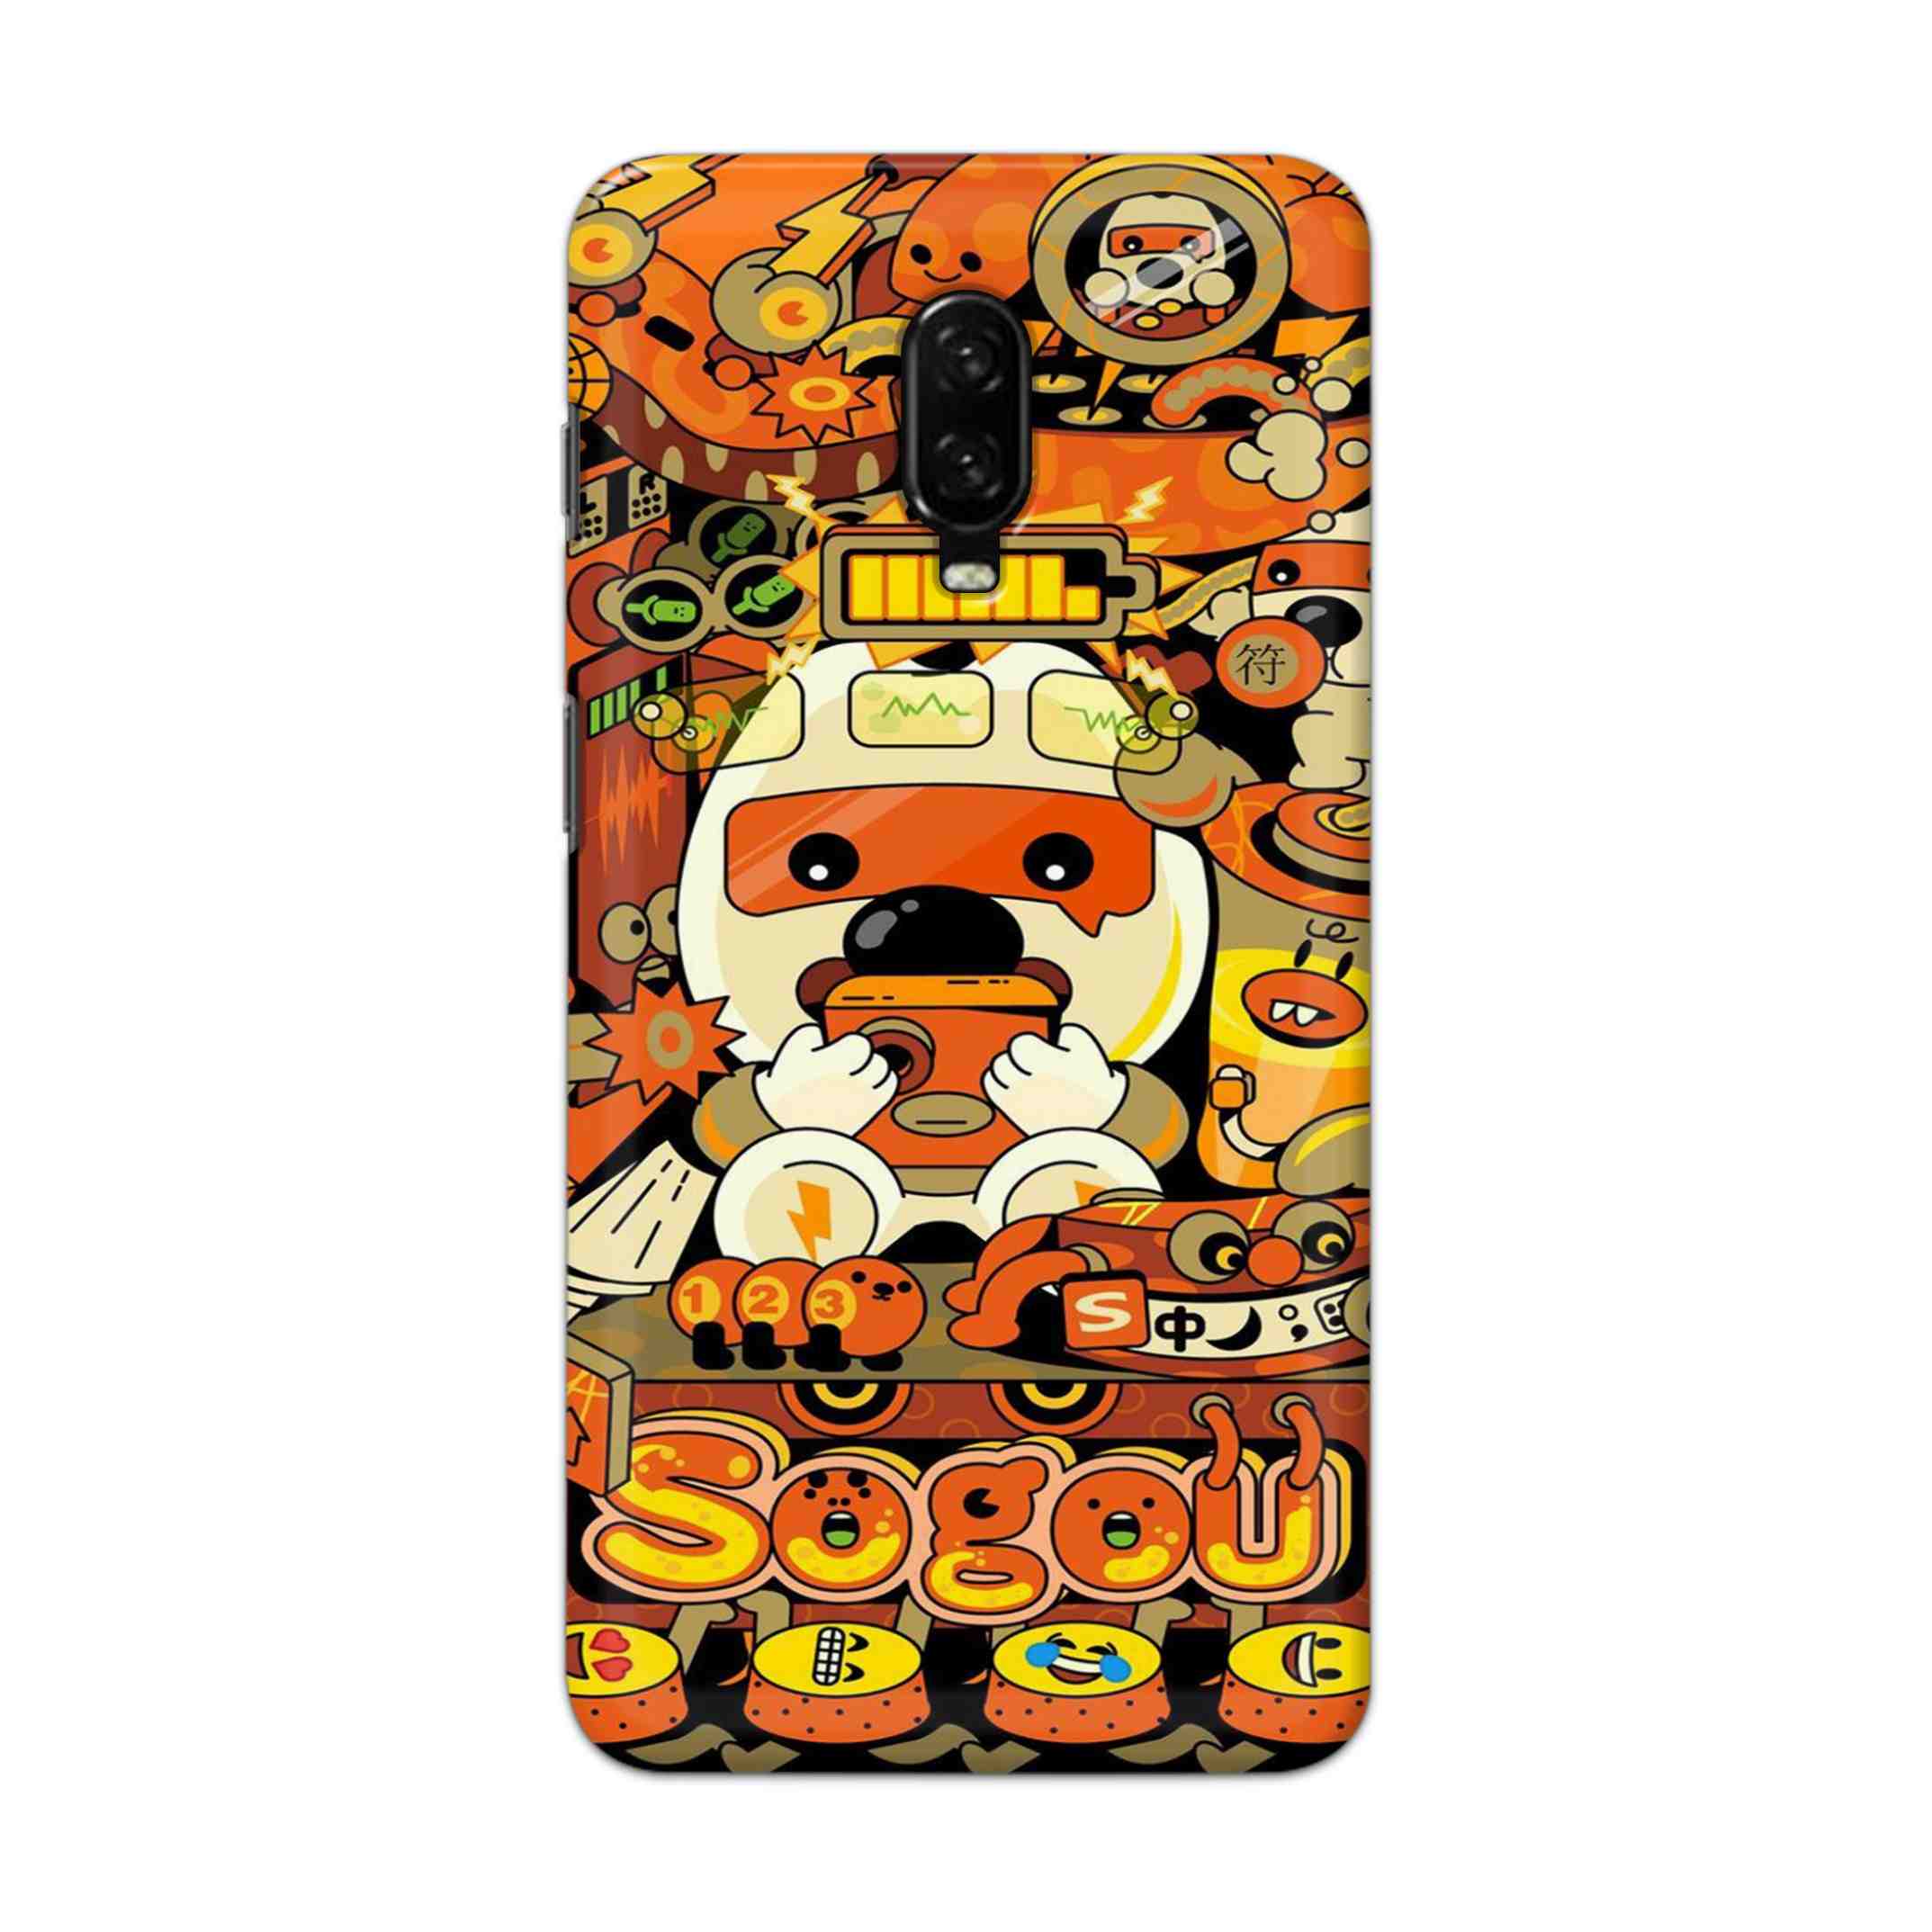 Buy Sogou Hard Back Mobile Phone Case Cover For OnePlus 6T Online